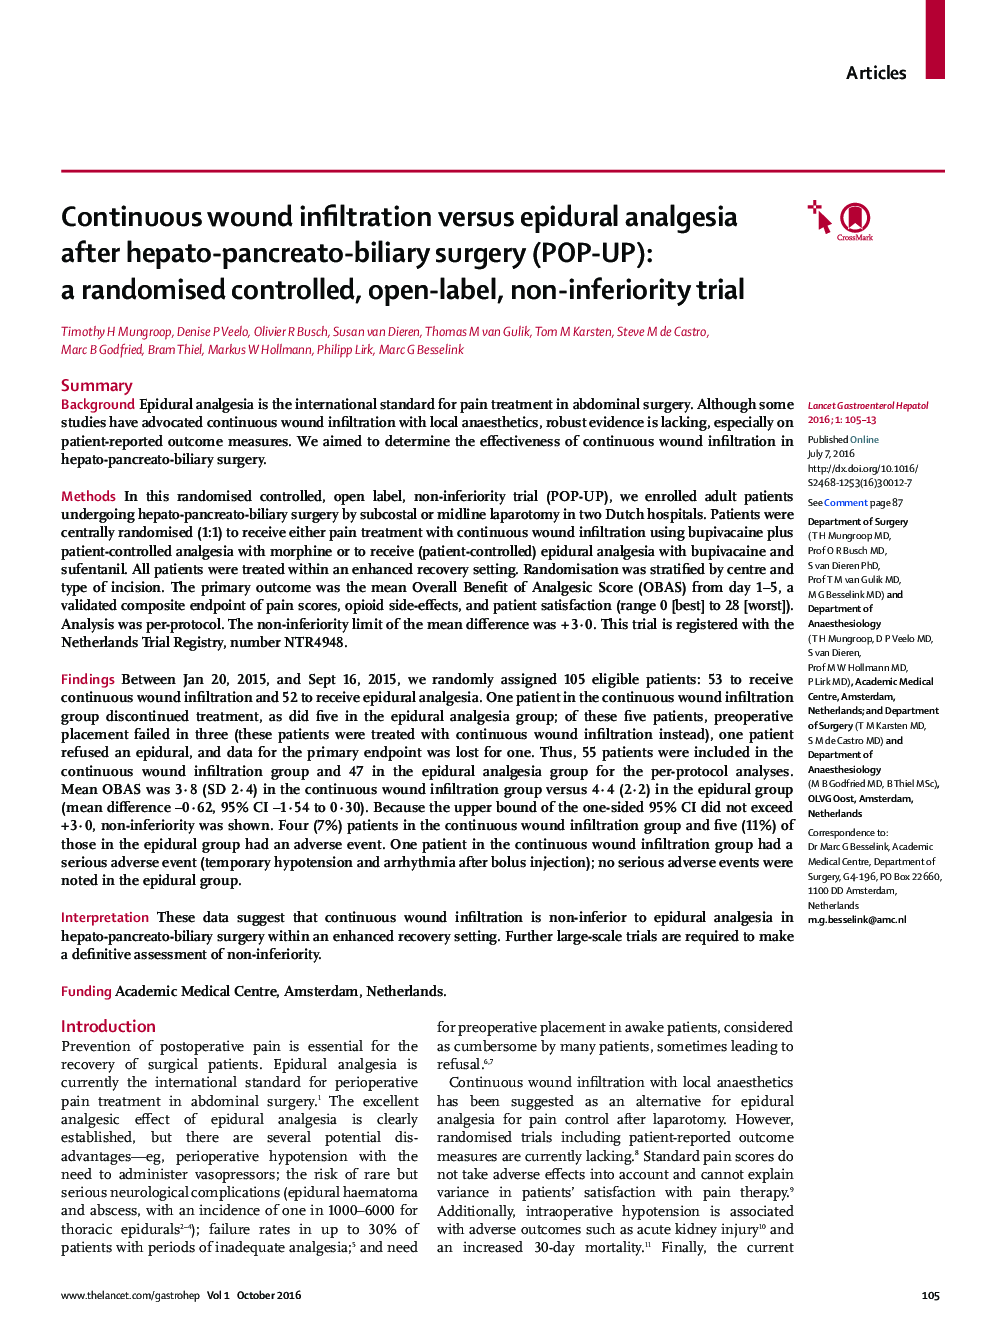 Continuous wound infiltration versus epidural analgesia after hepato-pancreato-biliary surgery (POP-UP): a randomised controlled, open-label, non-inferiority trial